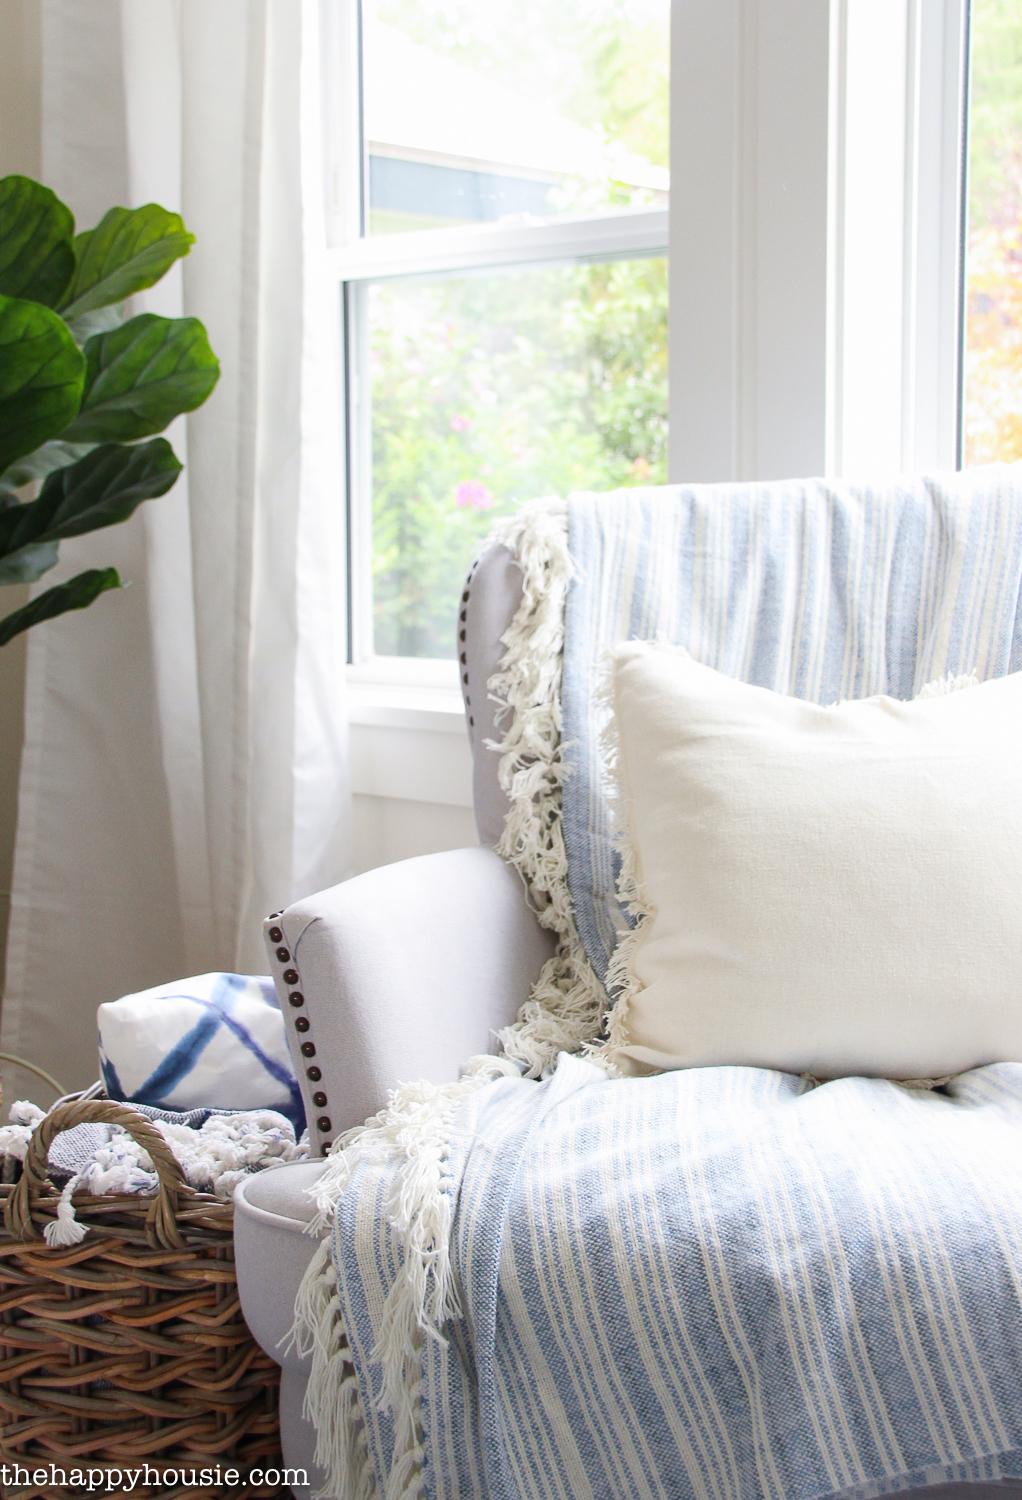 A cotton blue and white throw blanket is on an armchair.